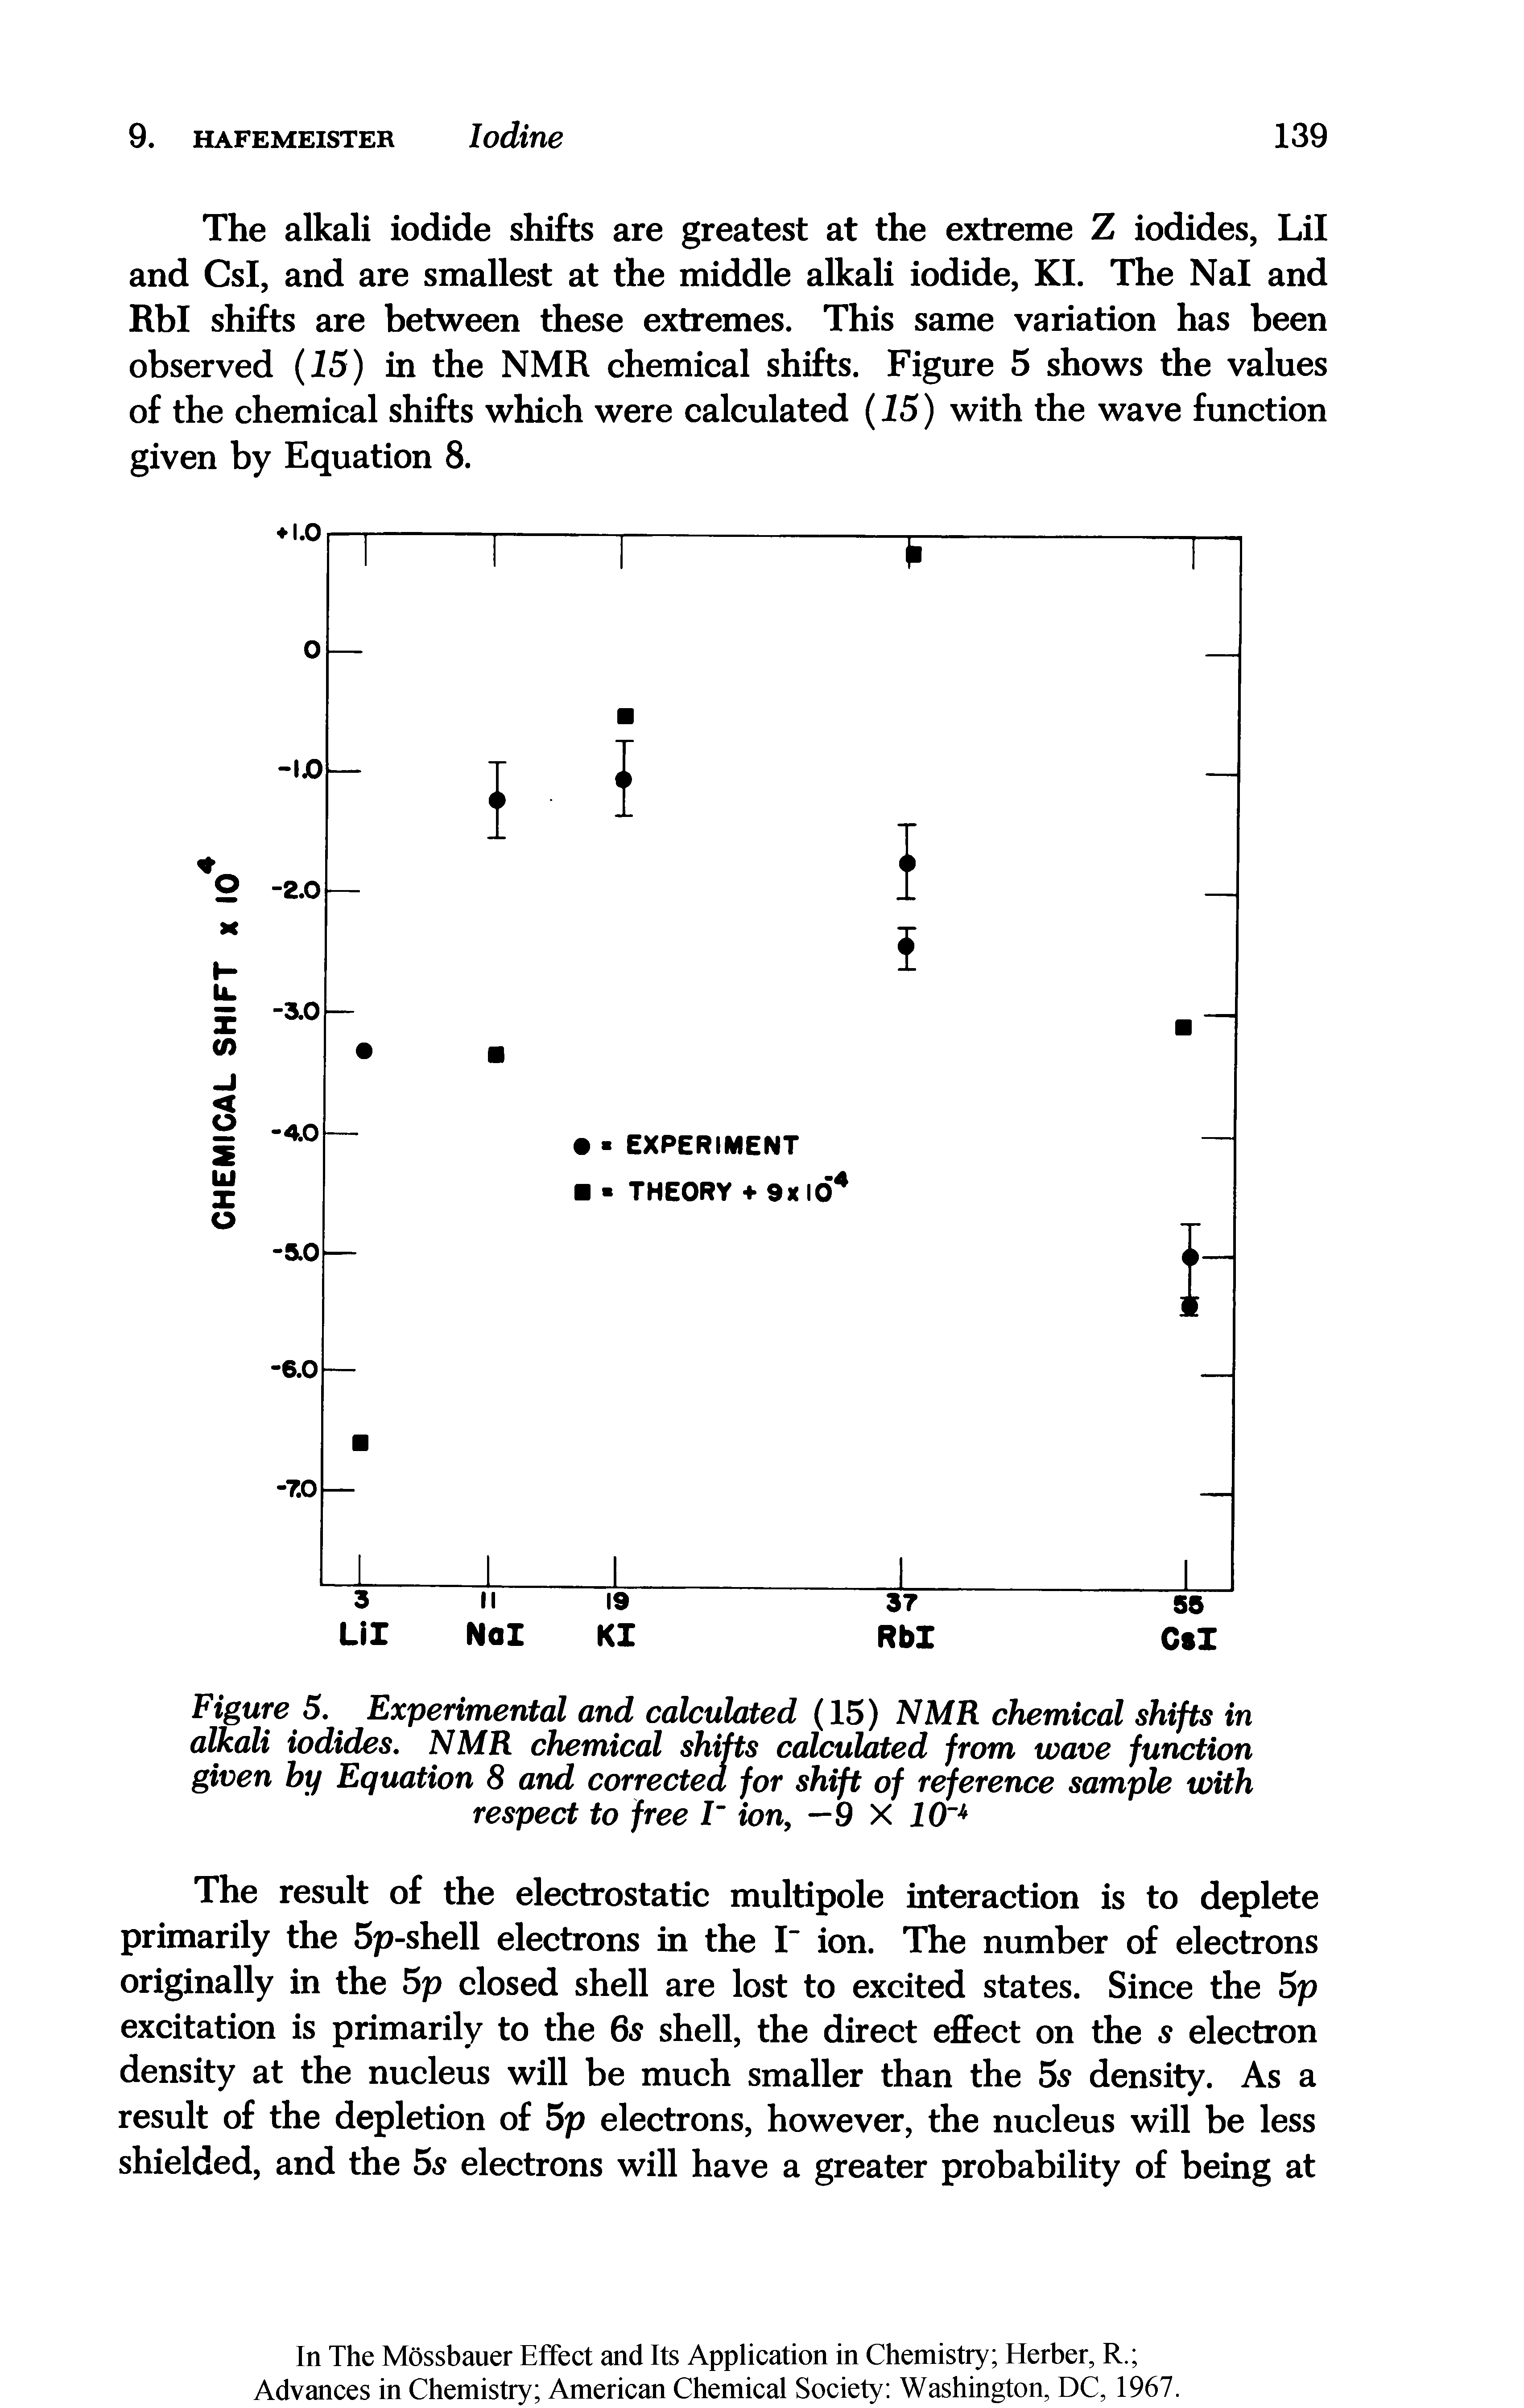 Figure 5. Experimental and calculated (15) NMR chemical shifts in alkali iodides. NMR chemical shifts calculated from wave function given by Equation 8 and corrected for shift of reference sample with respect to free I ion, —9 X 10 ...